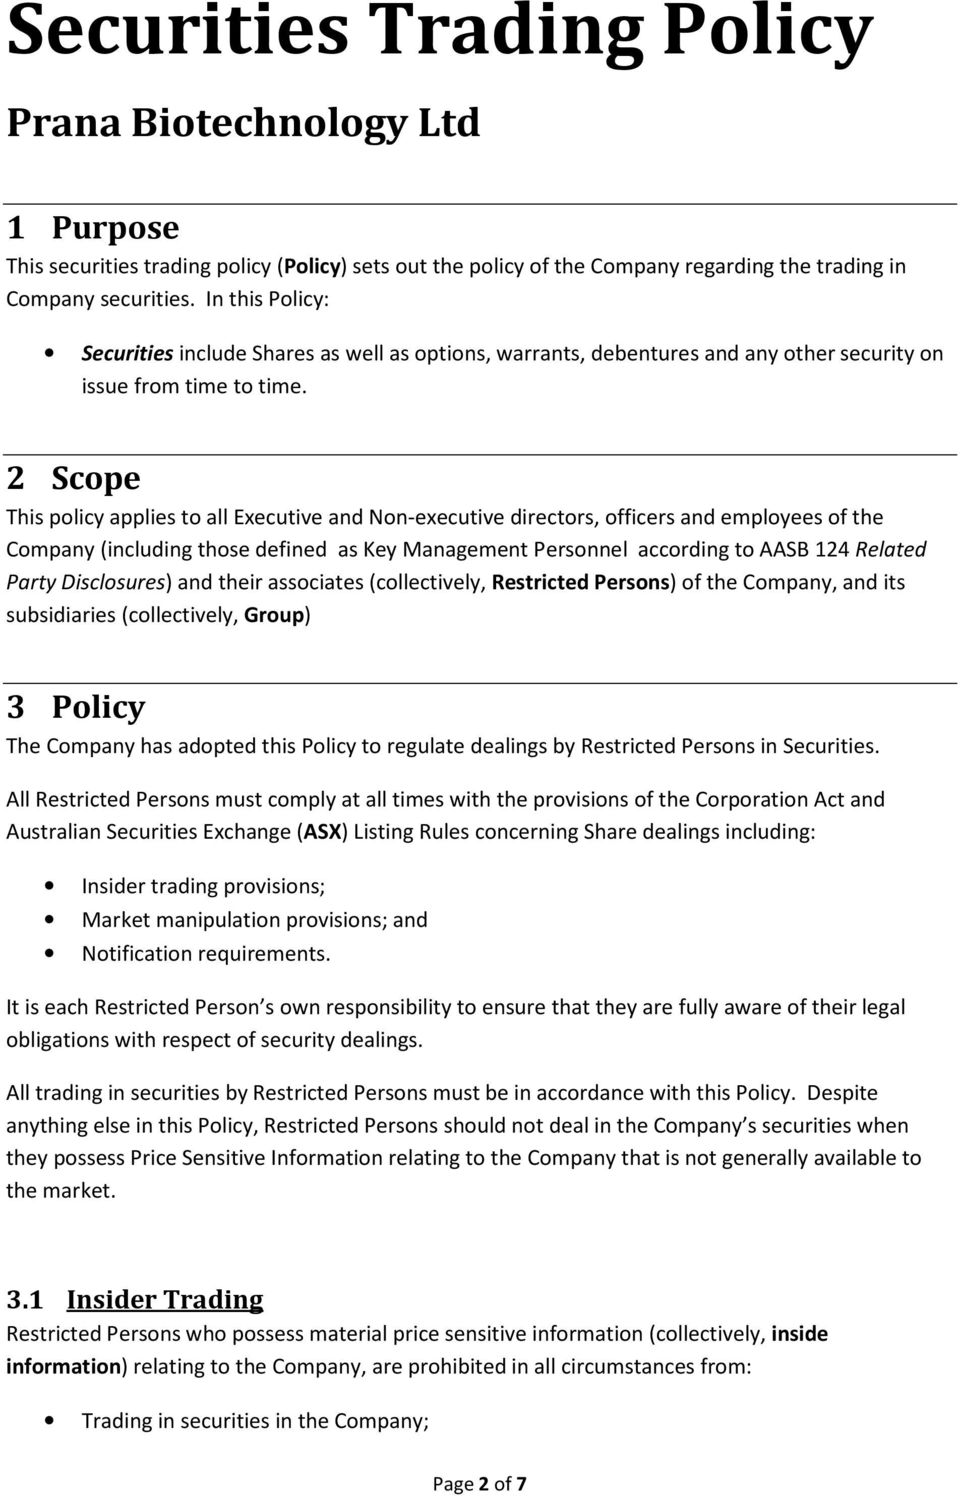 2 Scope This policy applies to all Executive and Non-executive directors, officers and employees of the Company (including those defined as Key Management Personnel according to AASB 124 Related